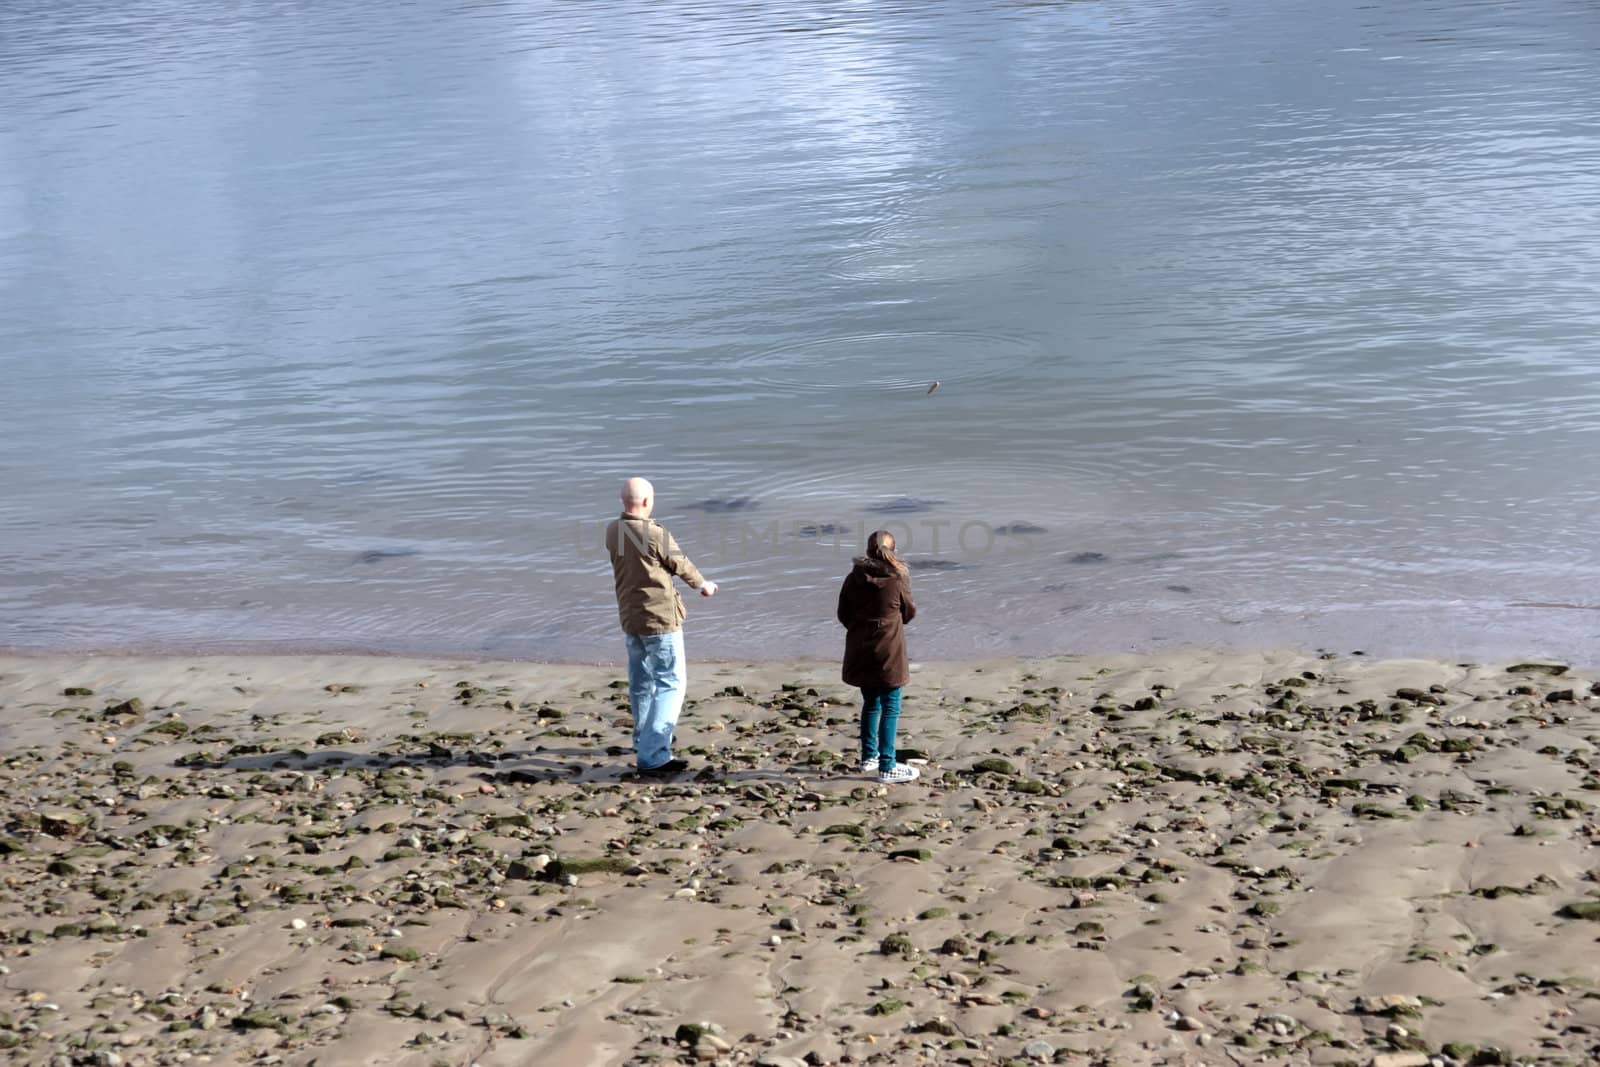 father and daughter skimming stones on the seashore